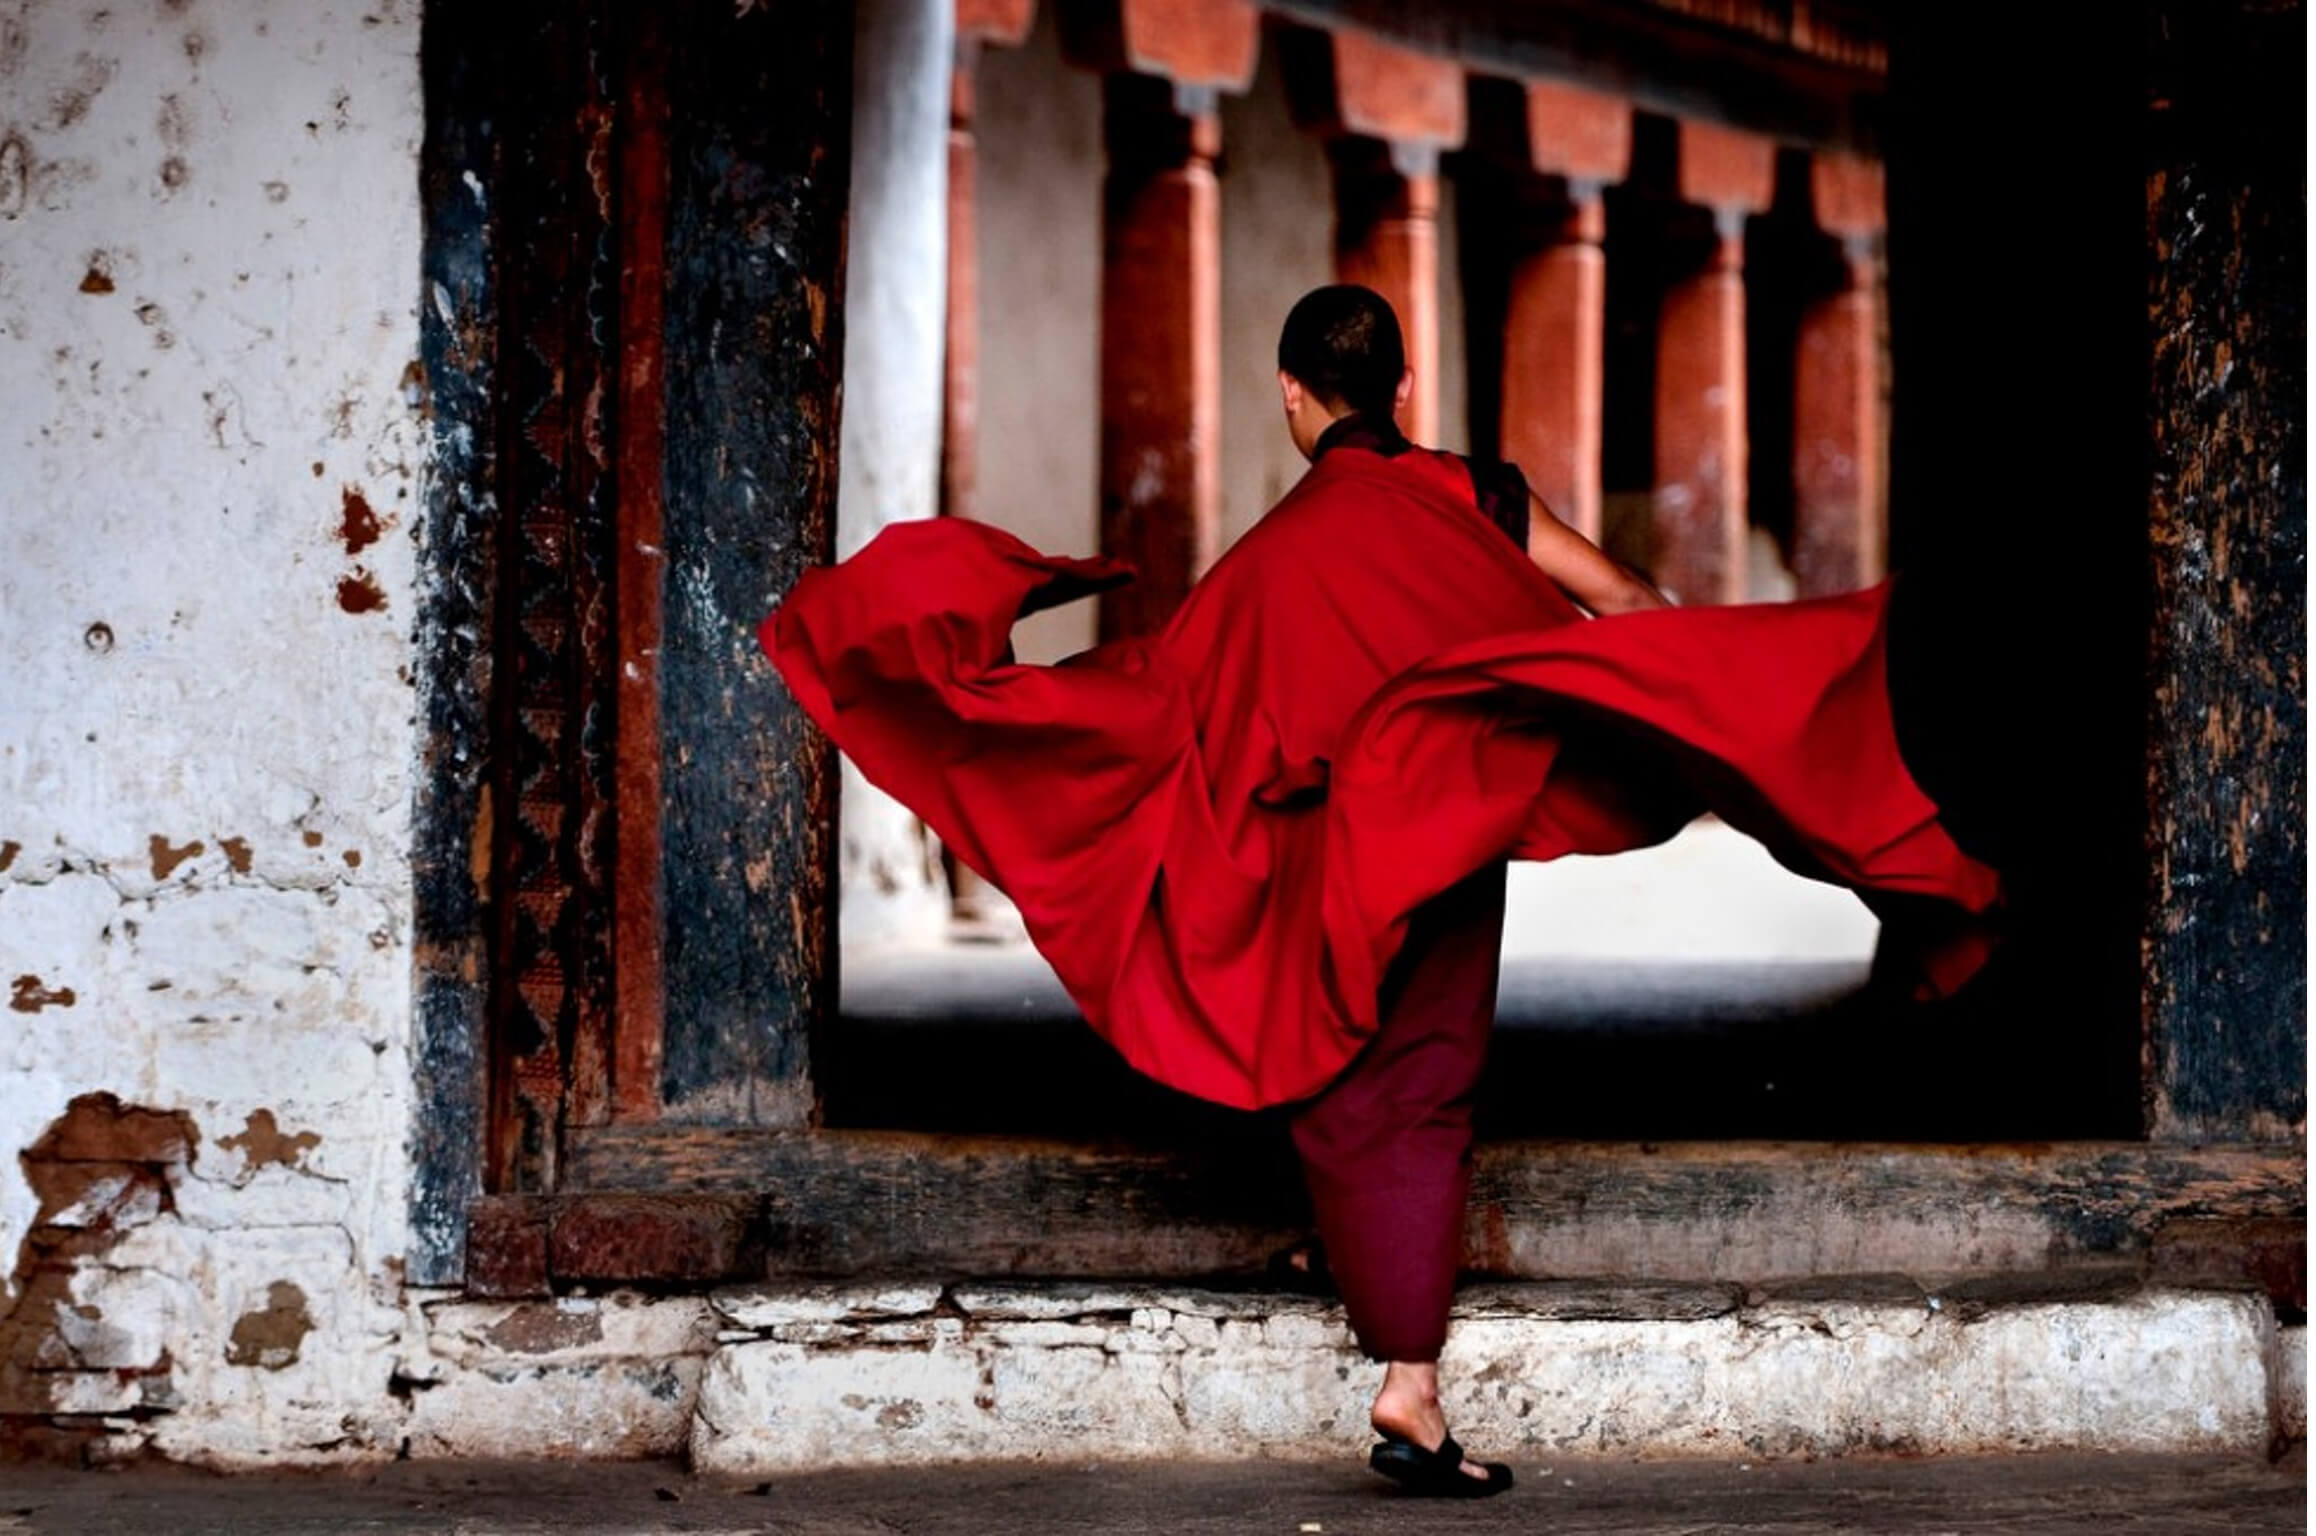 A monk in flowing red robes passing through a large doorway into a monastery.